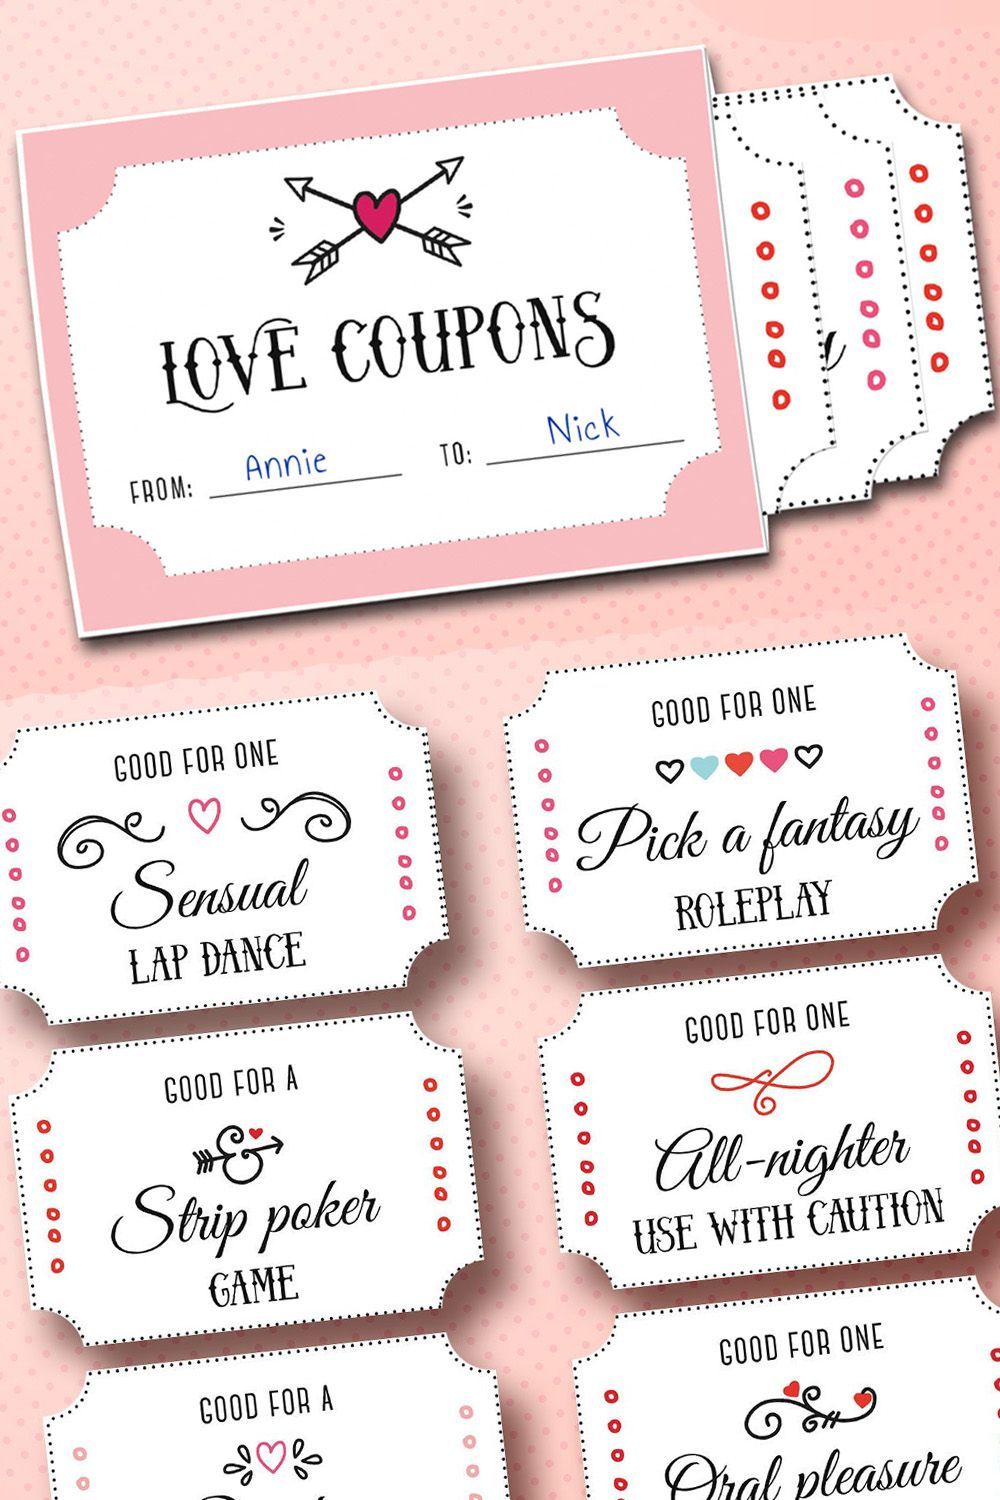 Love Coupons Valentine Gift for Boyfriend Husband - Love Coupons Valentine Gift for Boyfriend Husband -   18 xmas gifts for boyfriend diy ideas